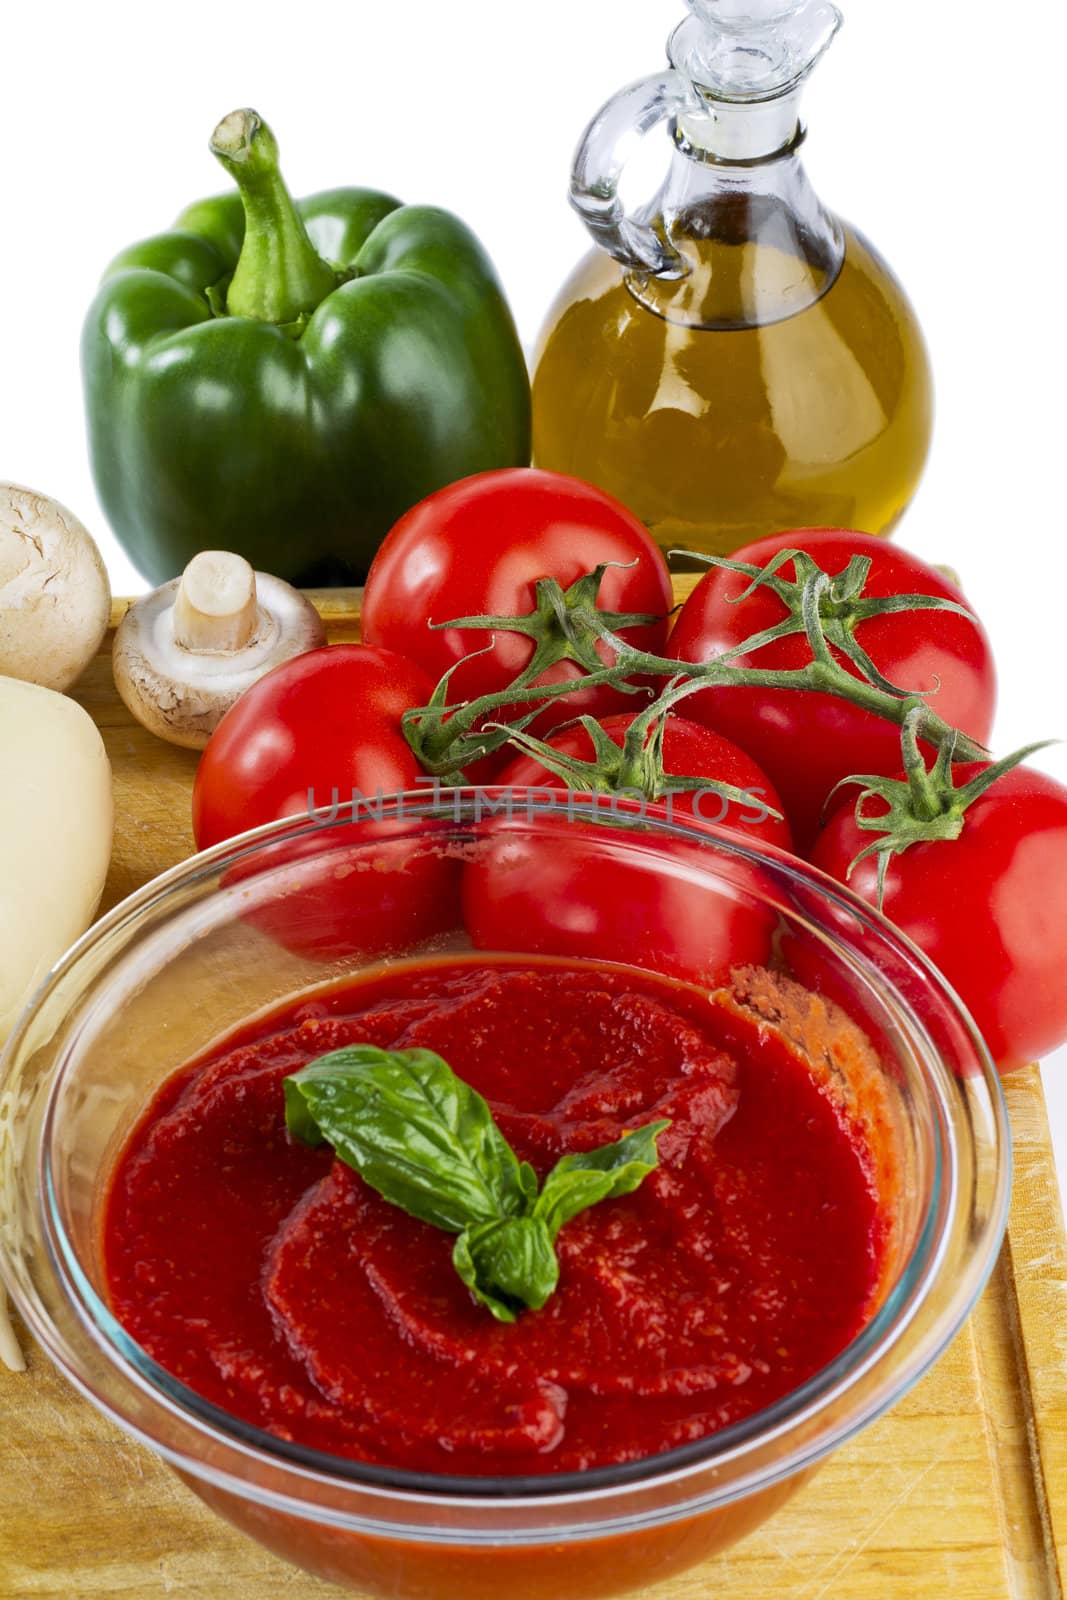 tomato sauce with tomato olive oil  green paper and mushroom in a wooden board